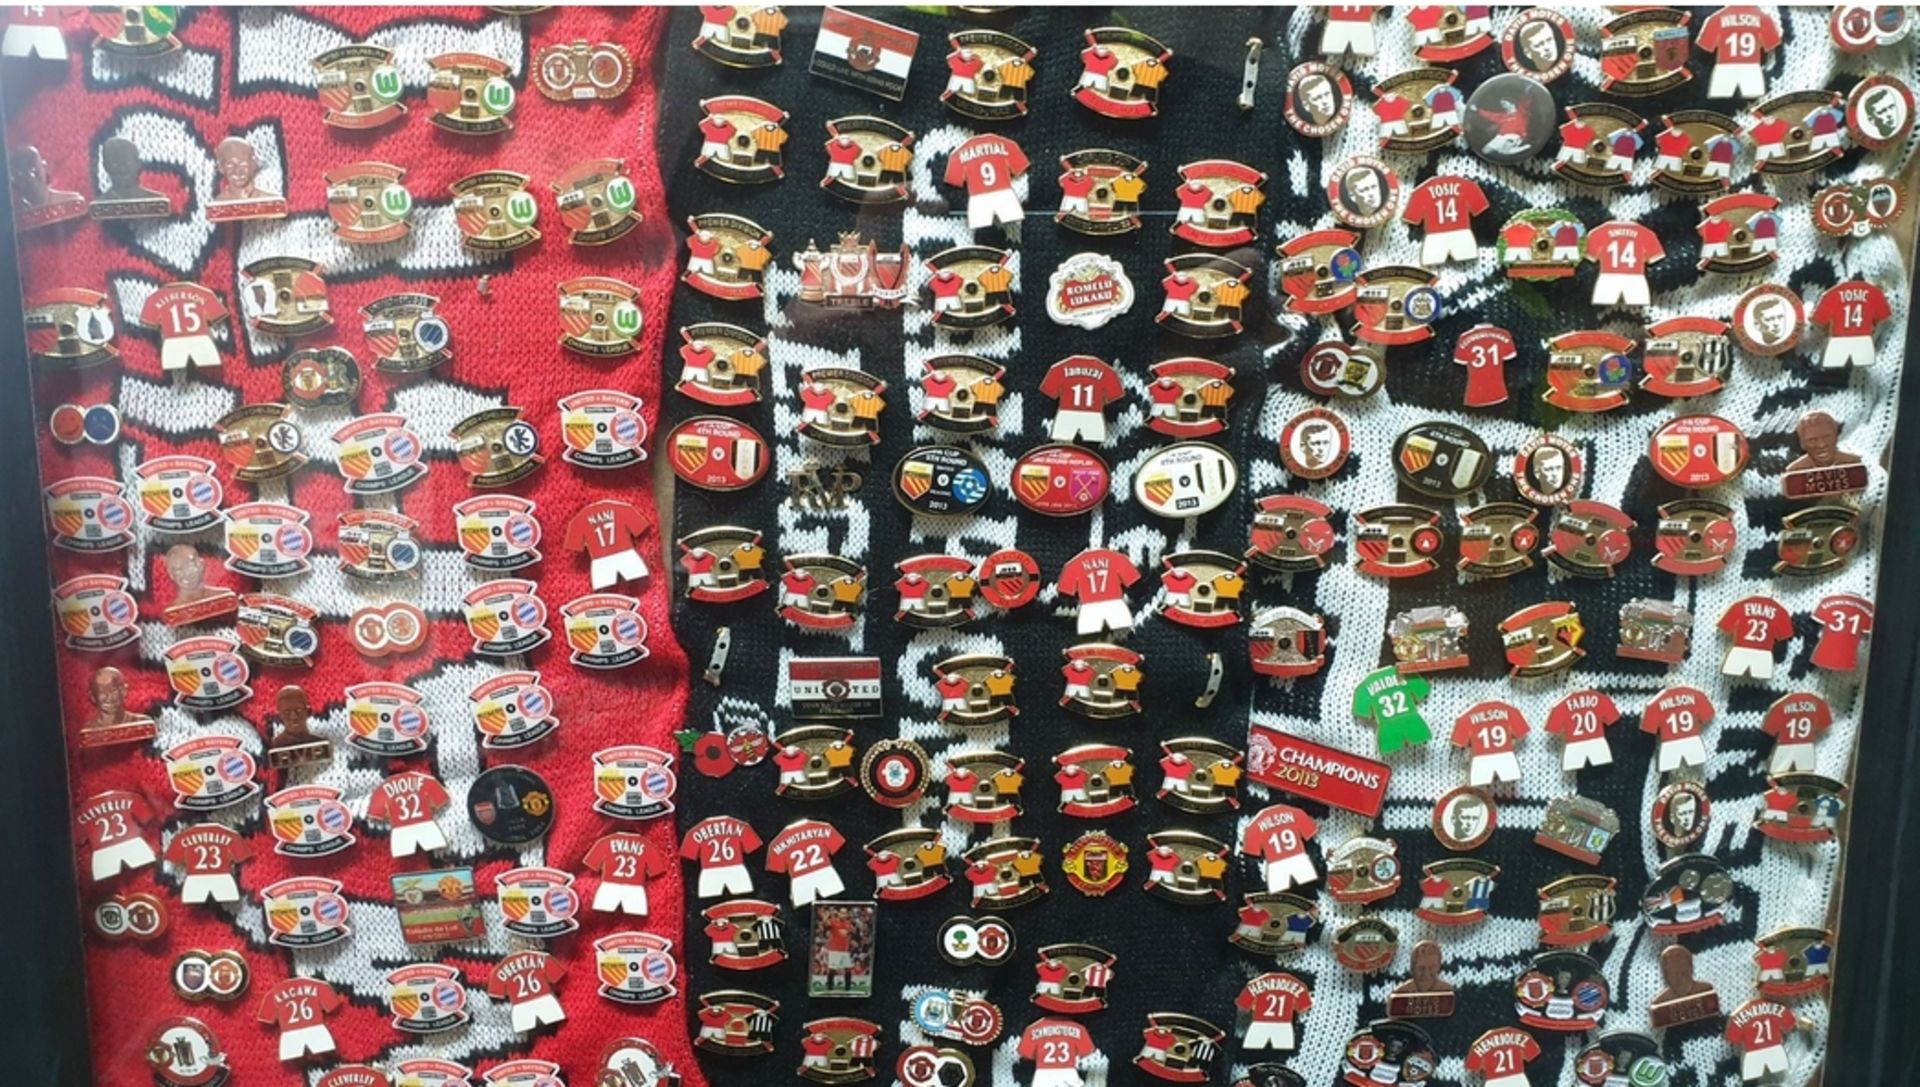 Over 300 Plus Manchester United Pin Badges - Image 3 of 3